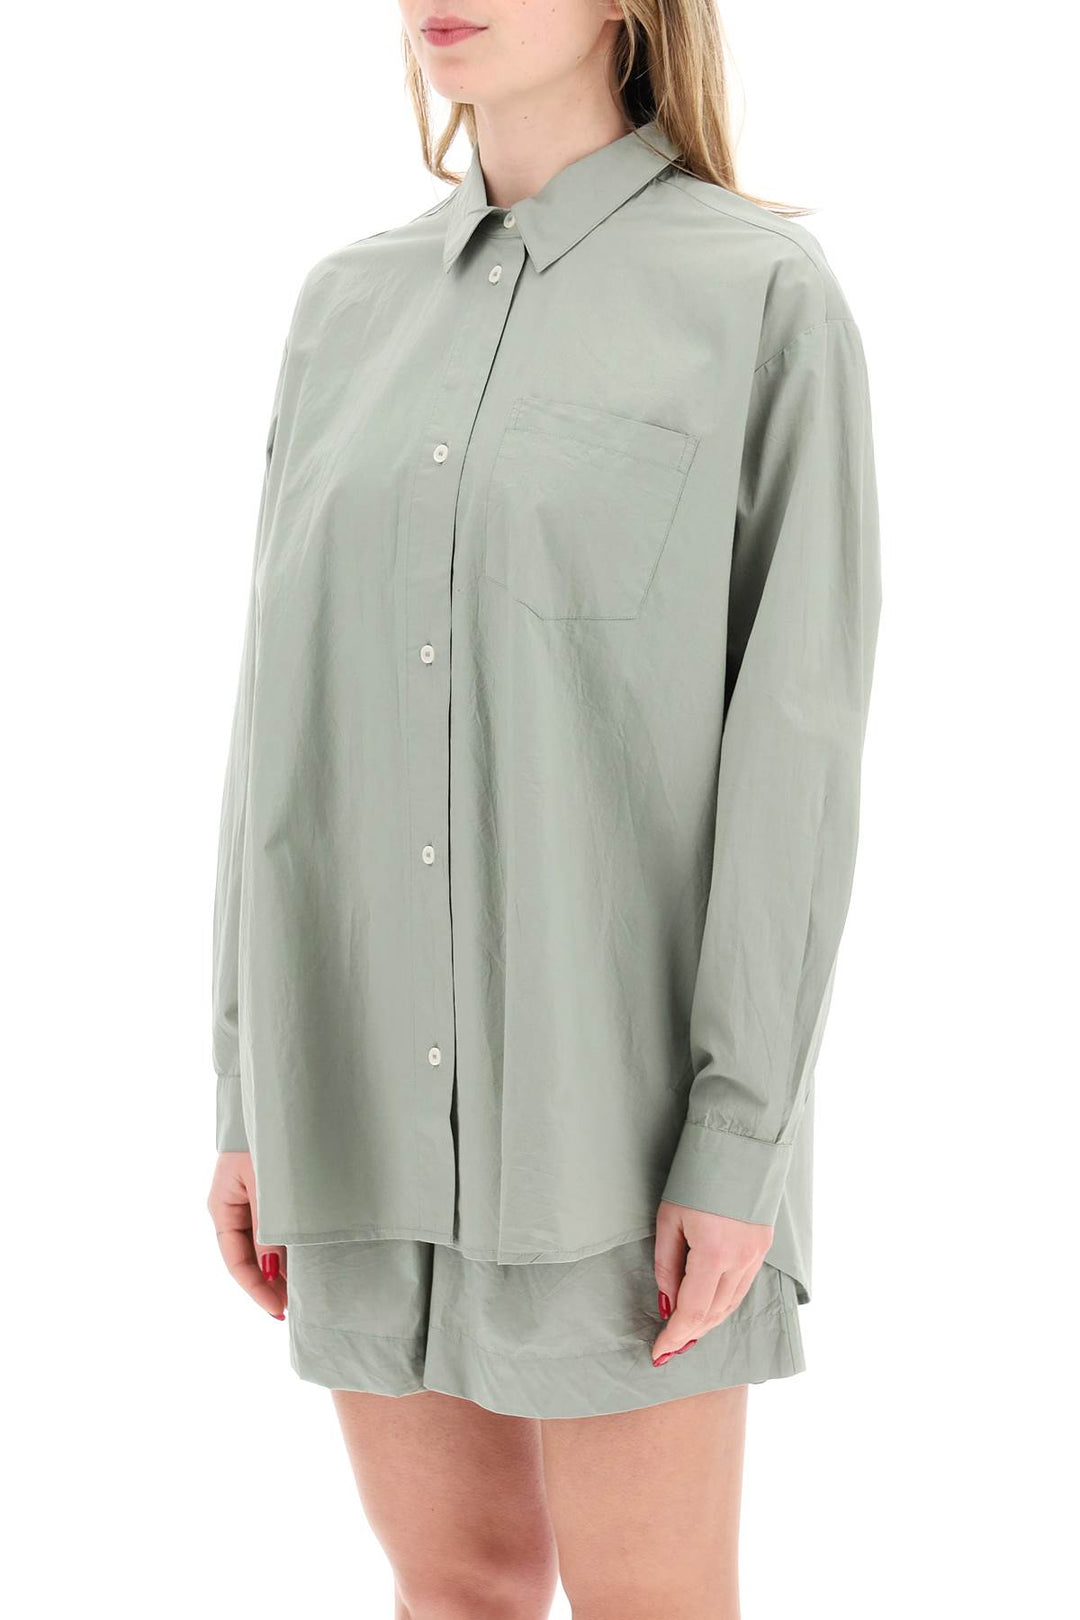 Skall Studio Replace With Double Quoteoversized Organic Cotton Edgar Shirt   Verde